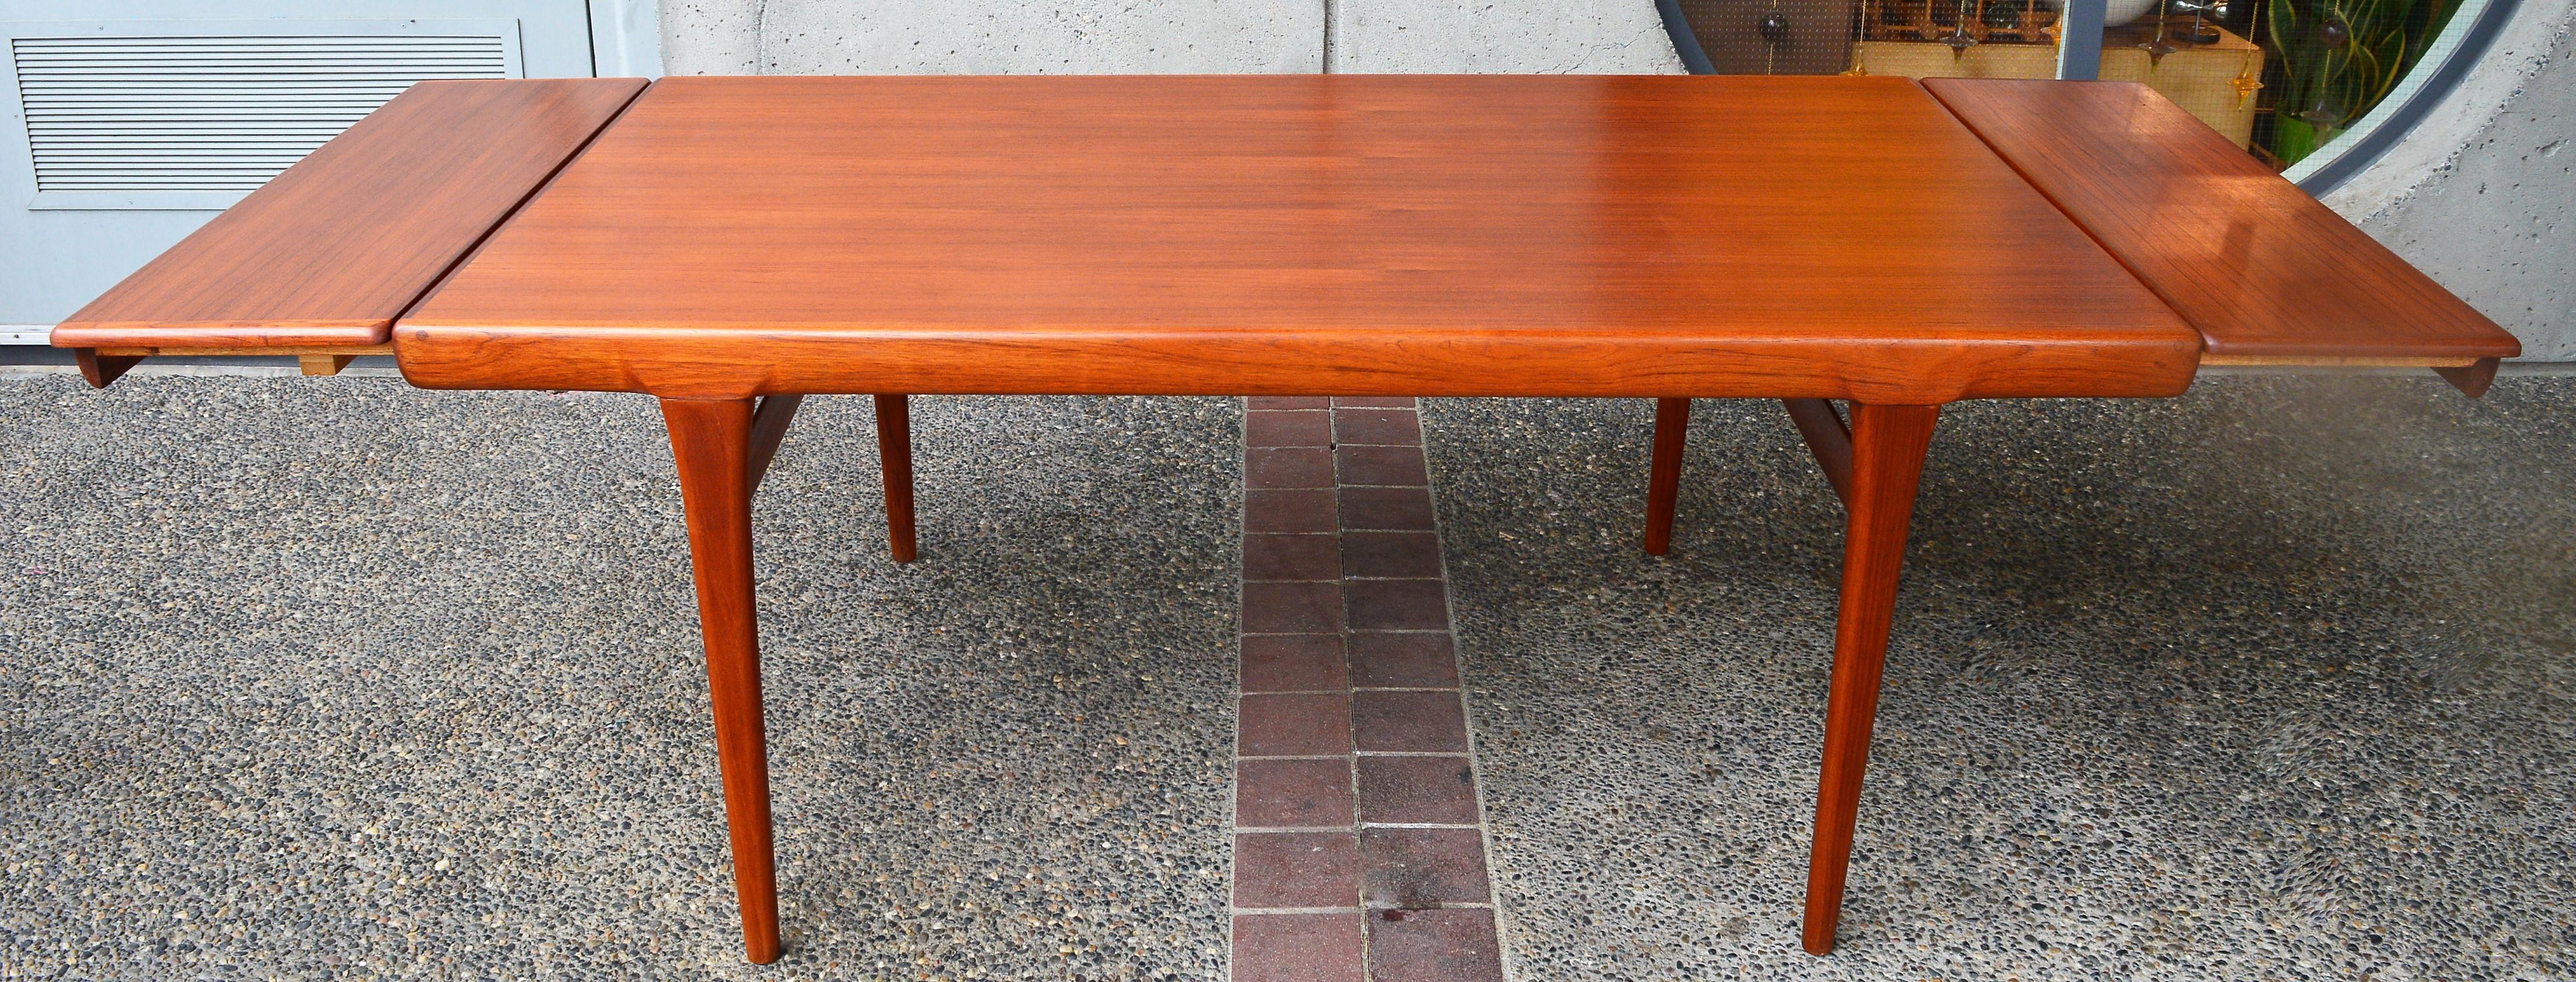 Danish Teak Two-Leaf Dining Table by Kofod Larsen with His Iconic Leg Detail 10